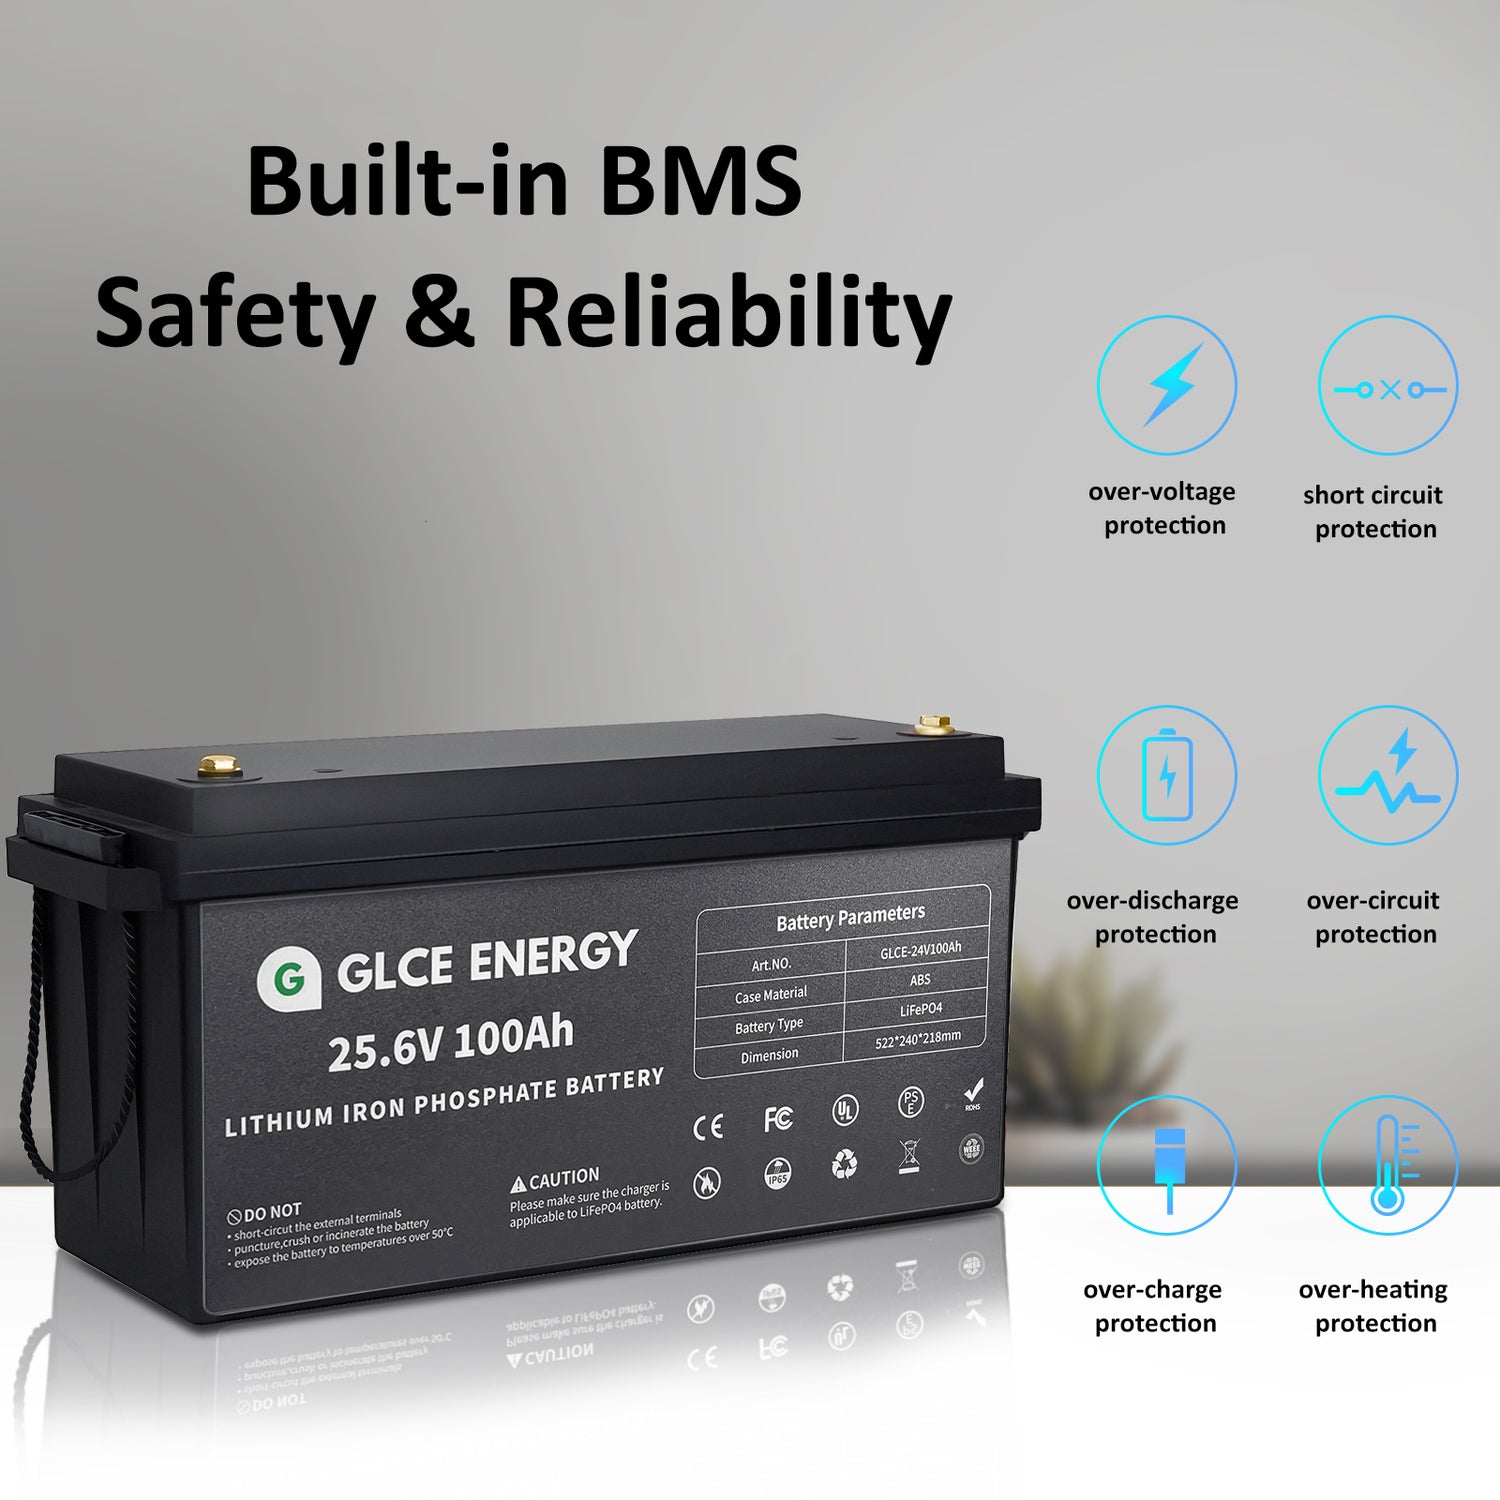 GLCE ENERGY LiFePO4 Battery Built-in BMS